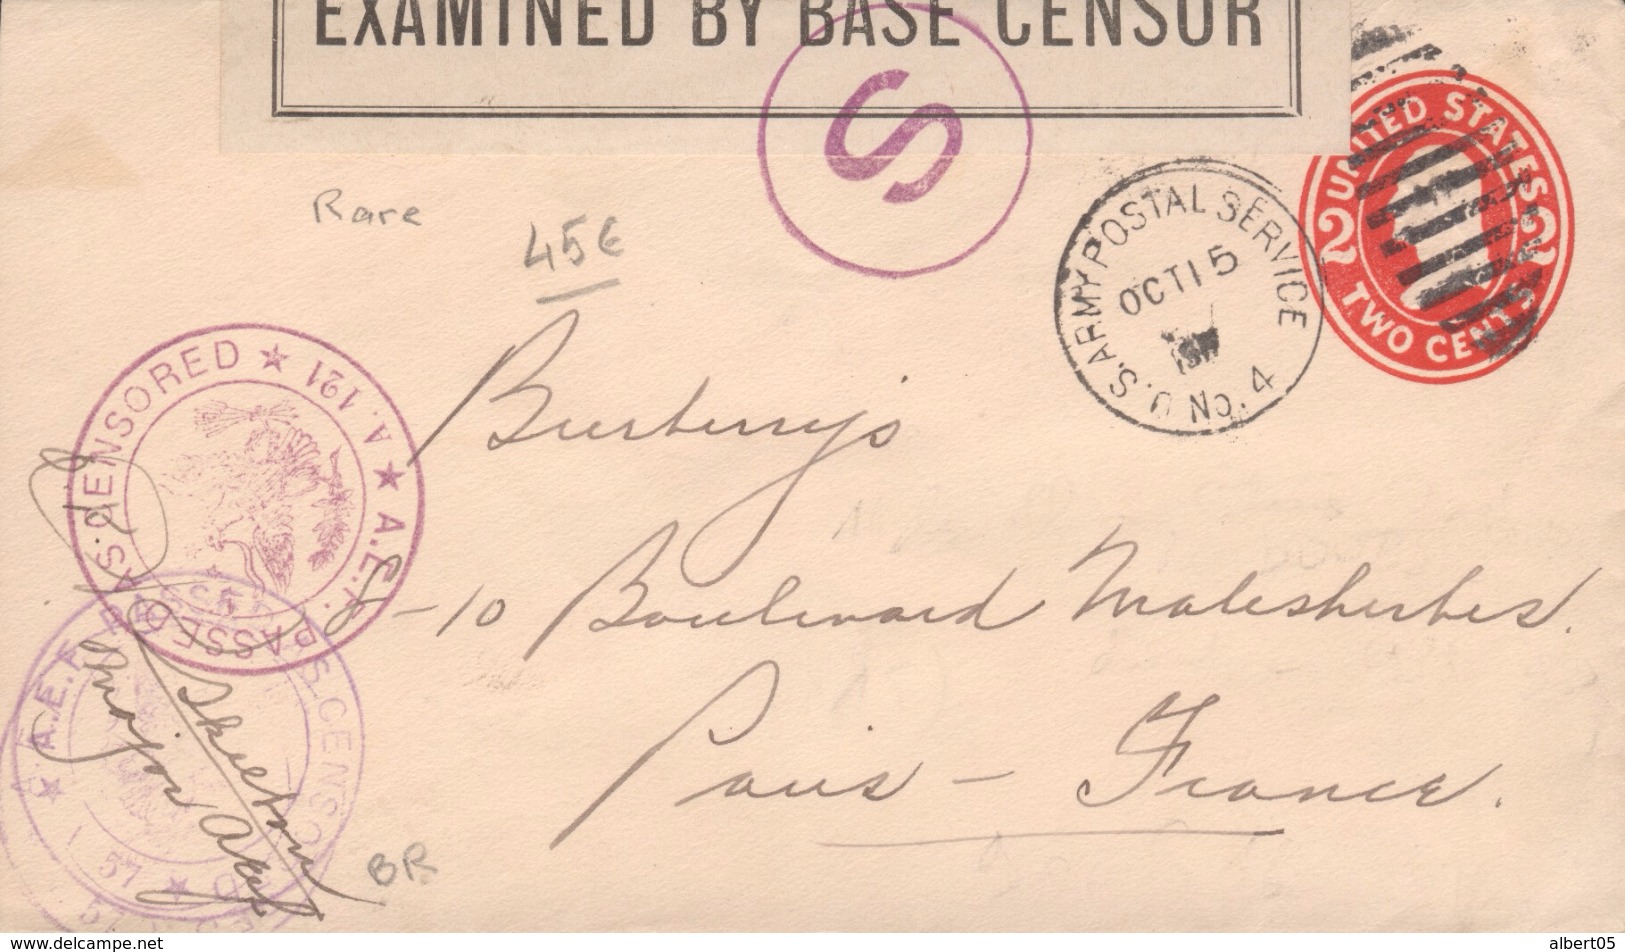 Army Postal Service - Examined By Base Censor - Lettre Chargée - Guerre De 1914-18